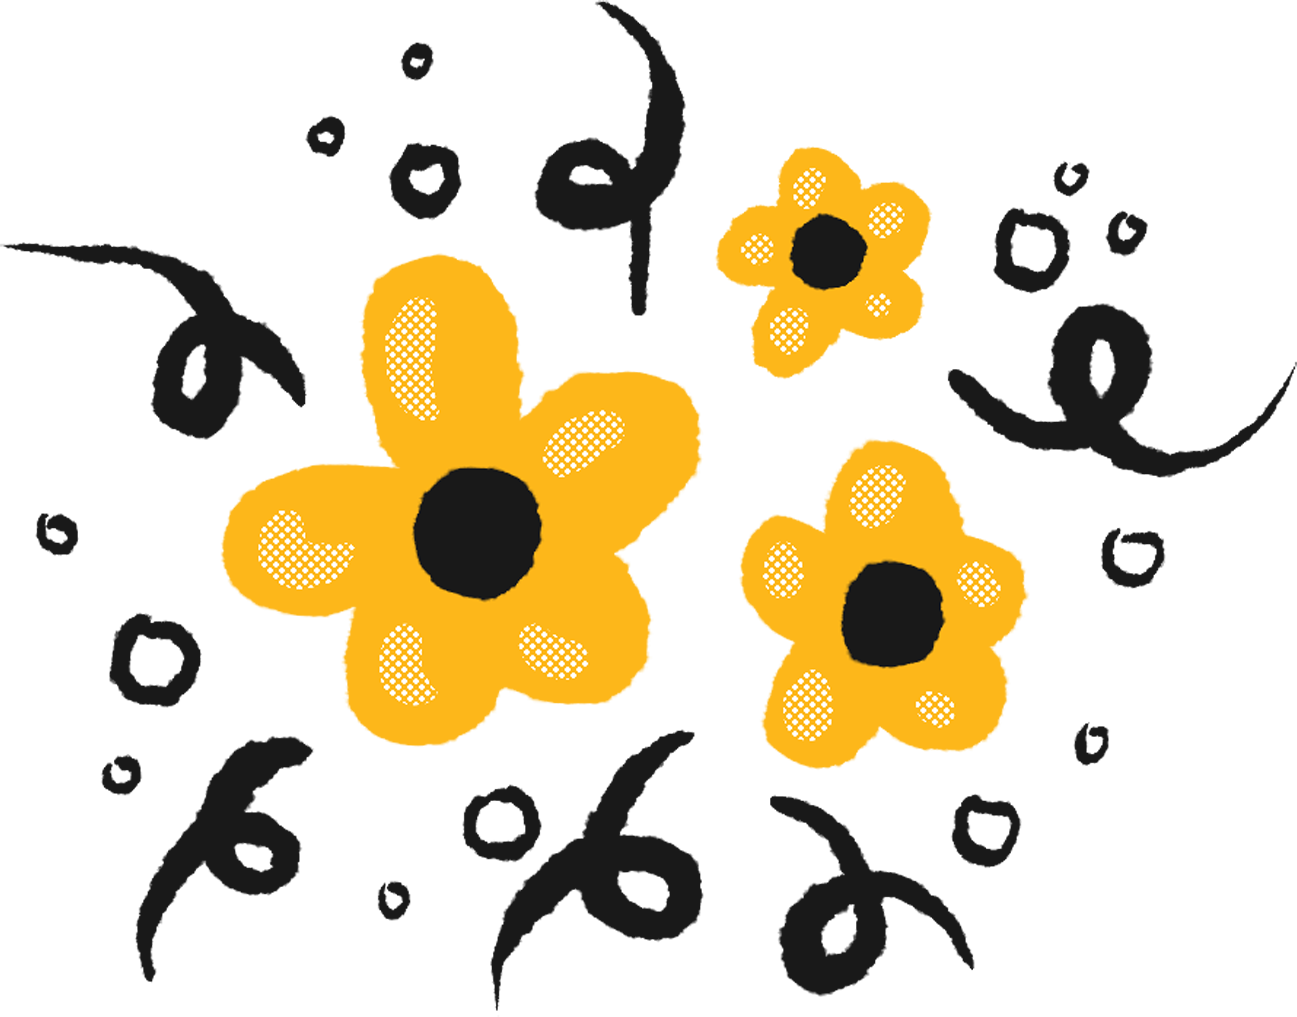 A hand drawn sticker of three gold flowers and black confetti